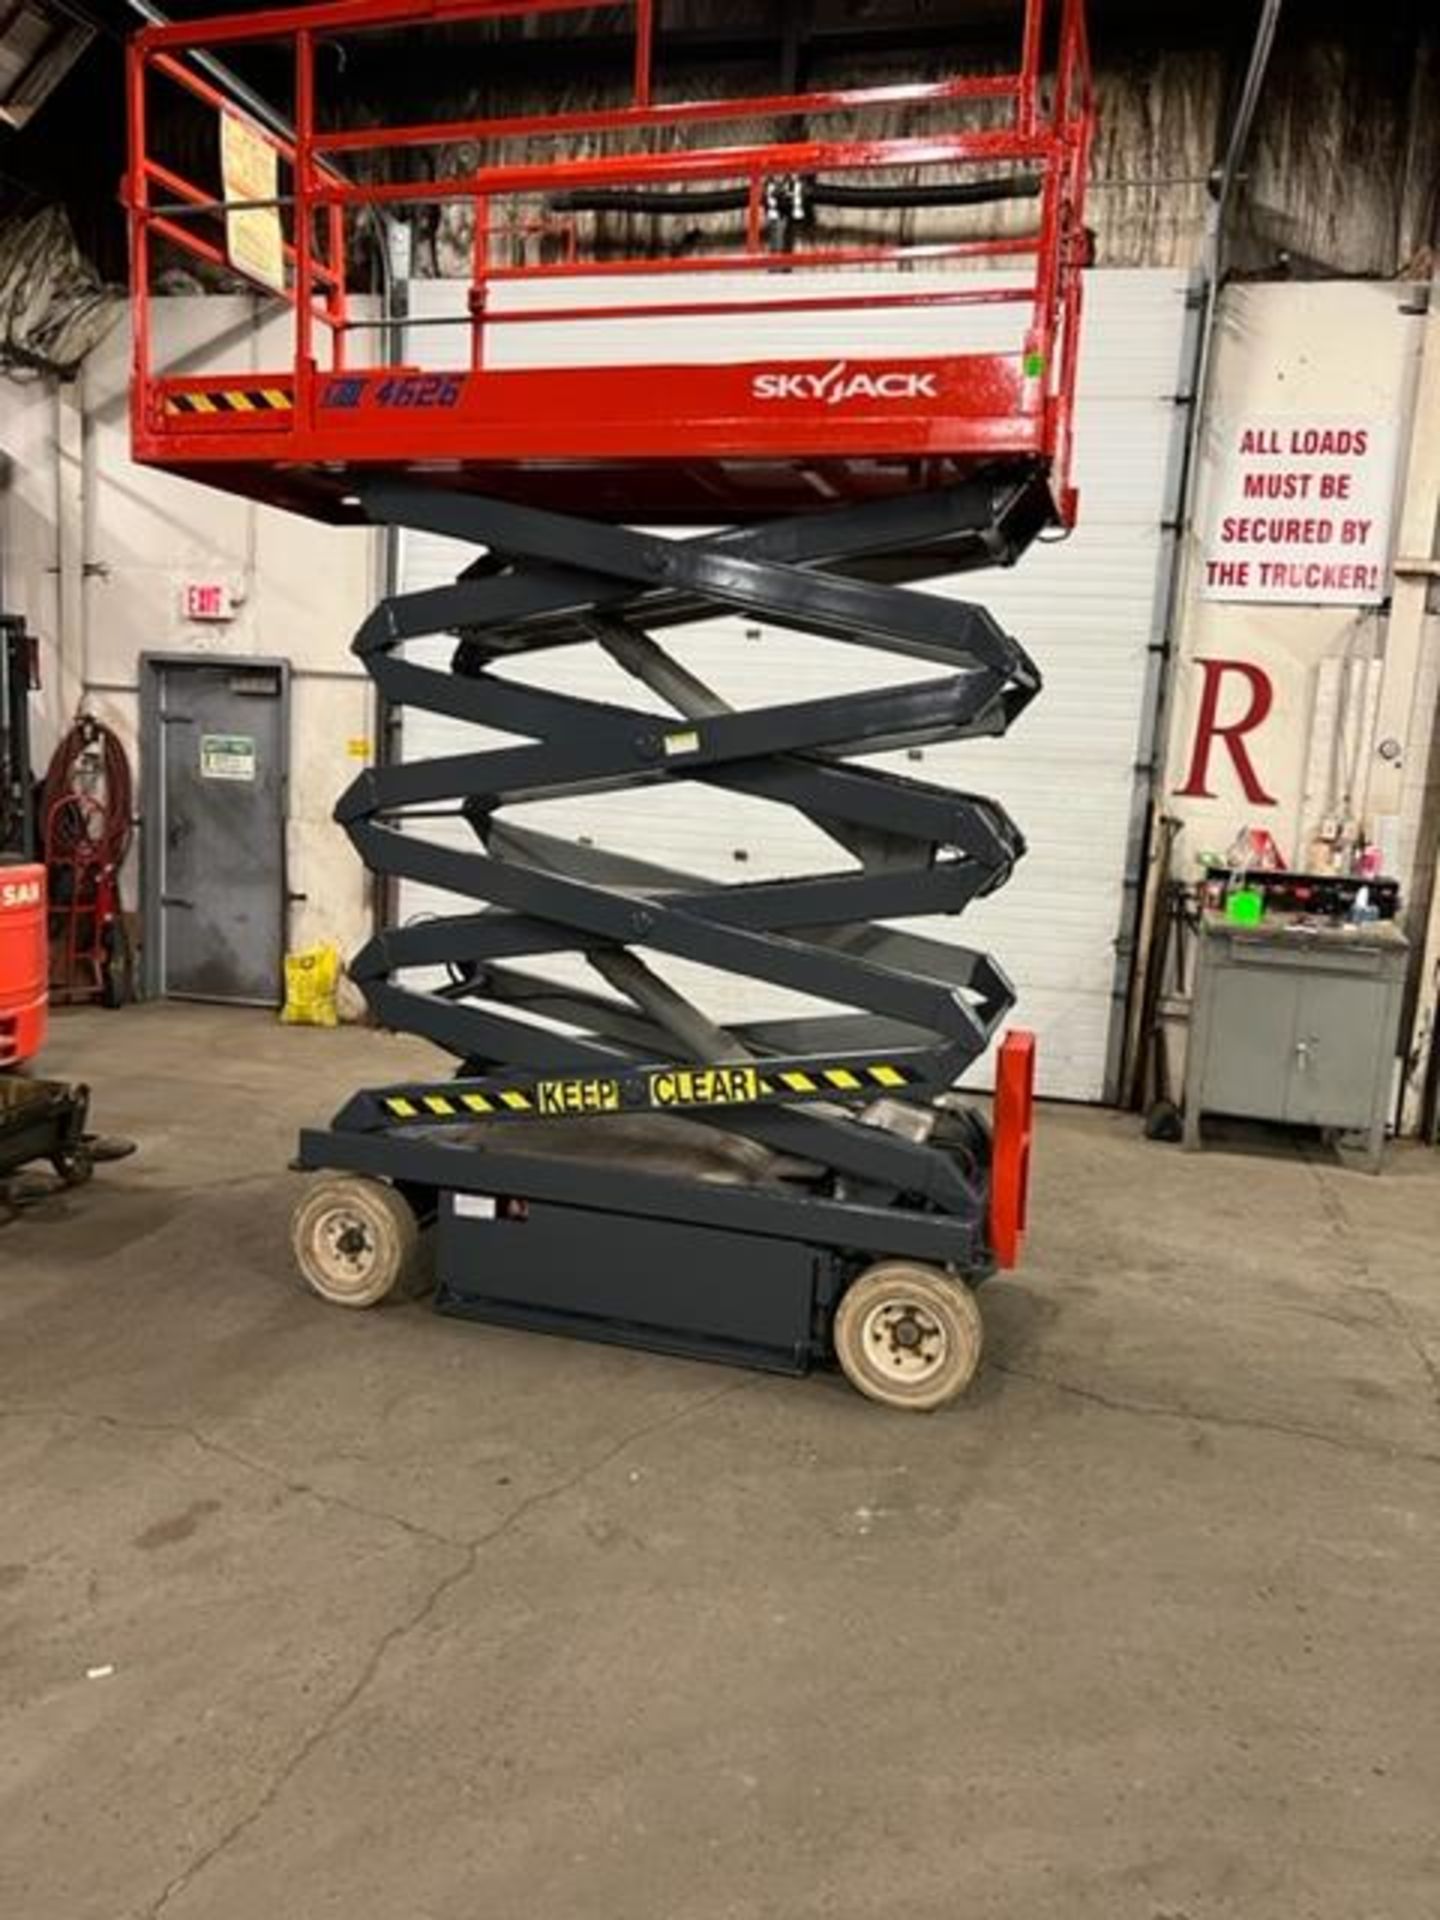 Skyjack III model 4226 Electric Motorized Scissor Lift with pendant controller & VERY LOW HOURS with